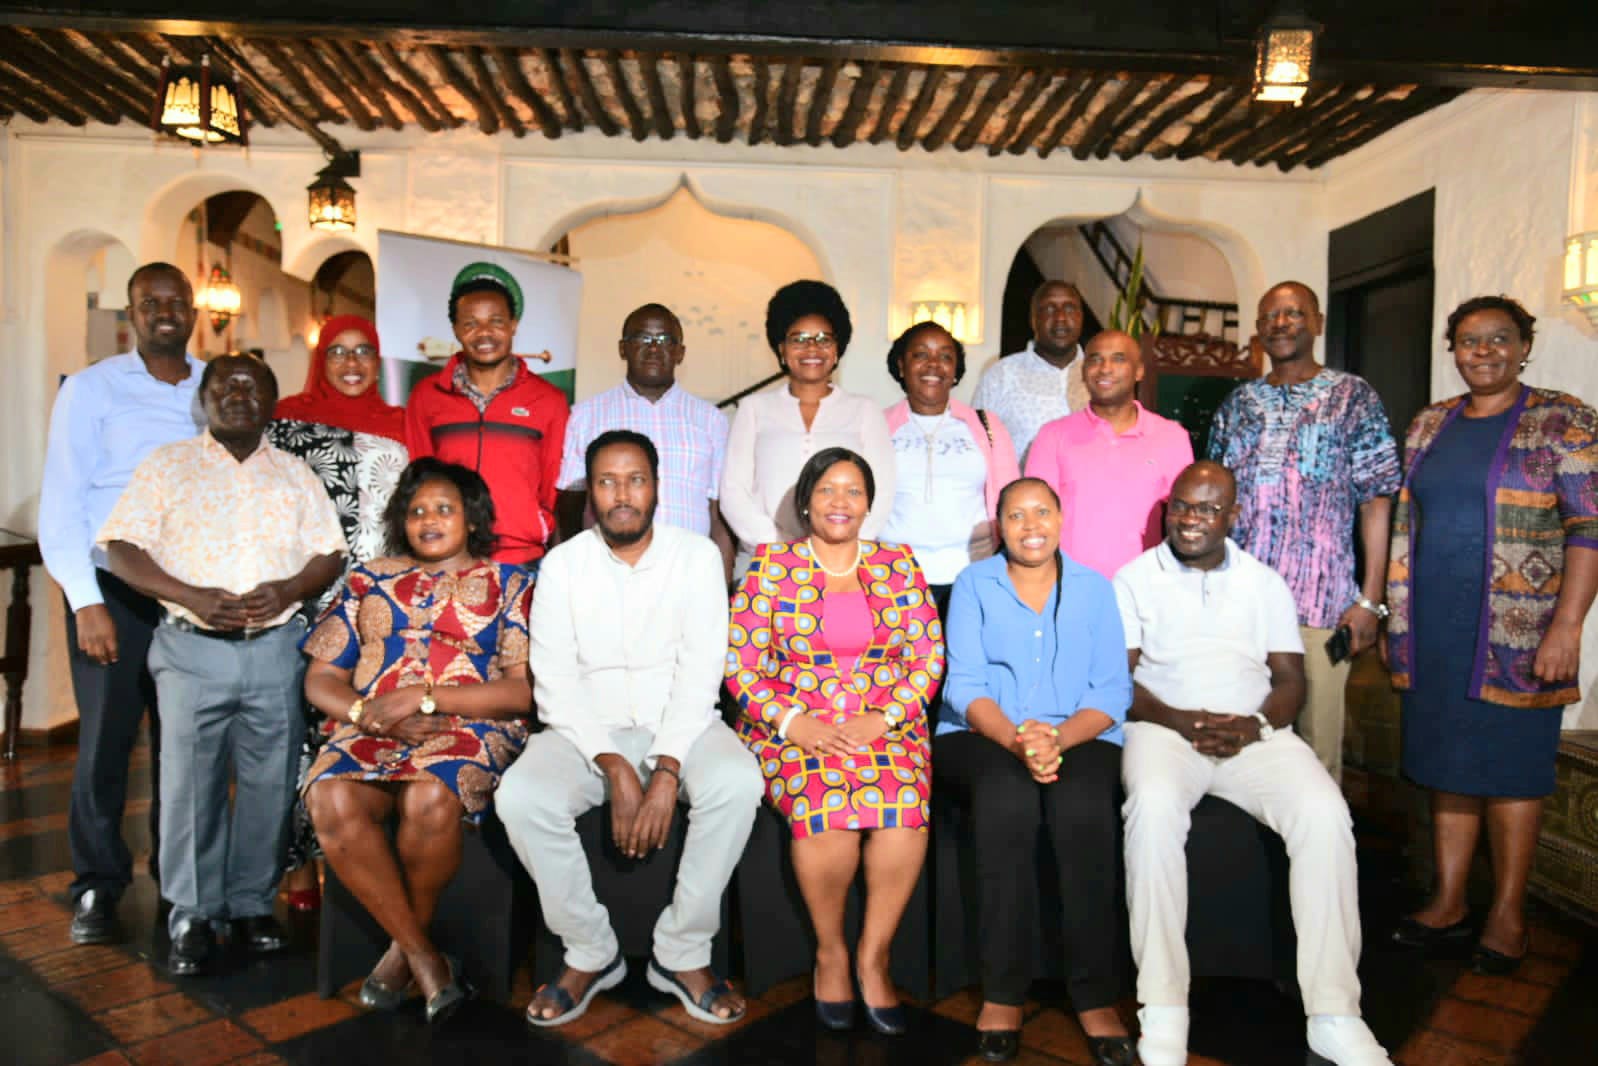  REGIONAL INTEGRATION COMMITTEE HOLDS FAMILIARIZATION MEETING WITH STAKEHOLDERS